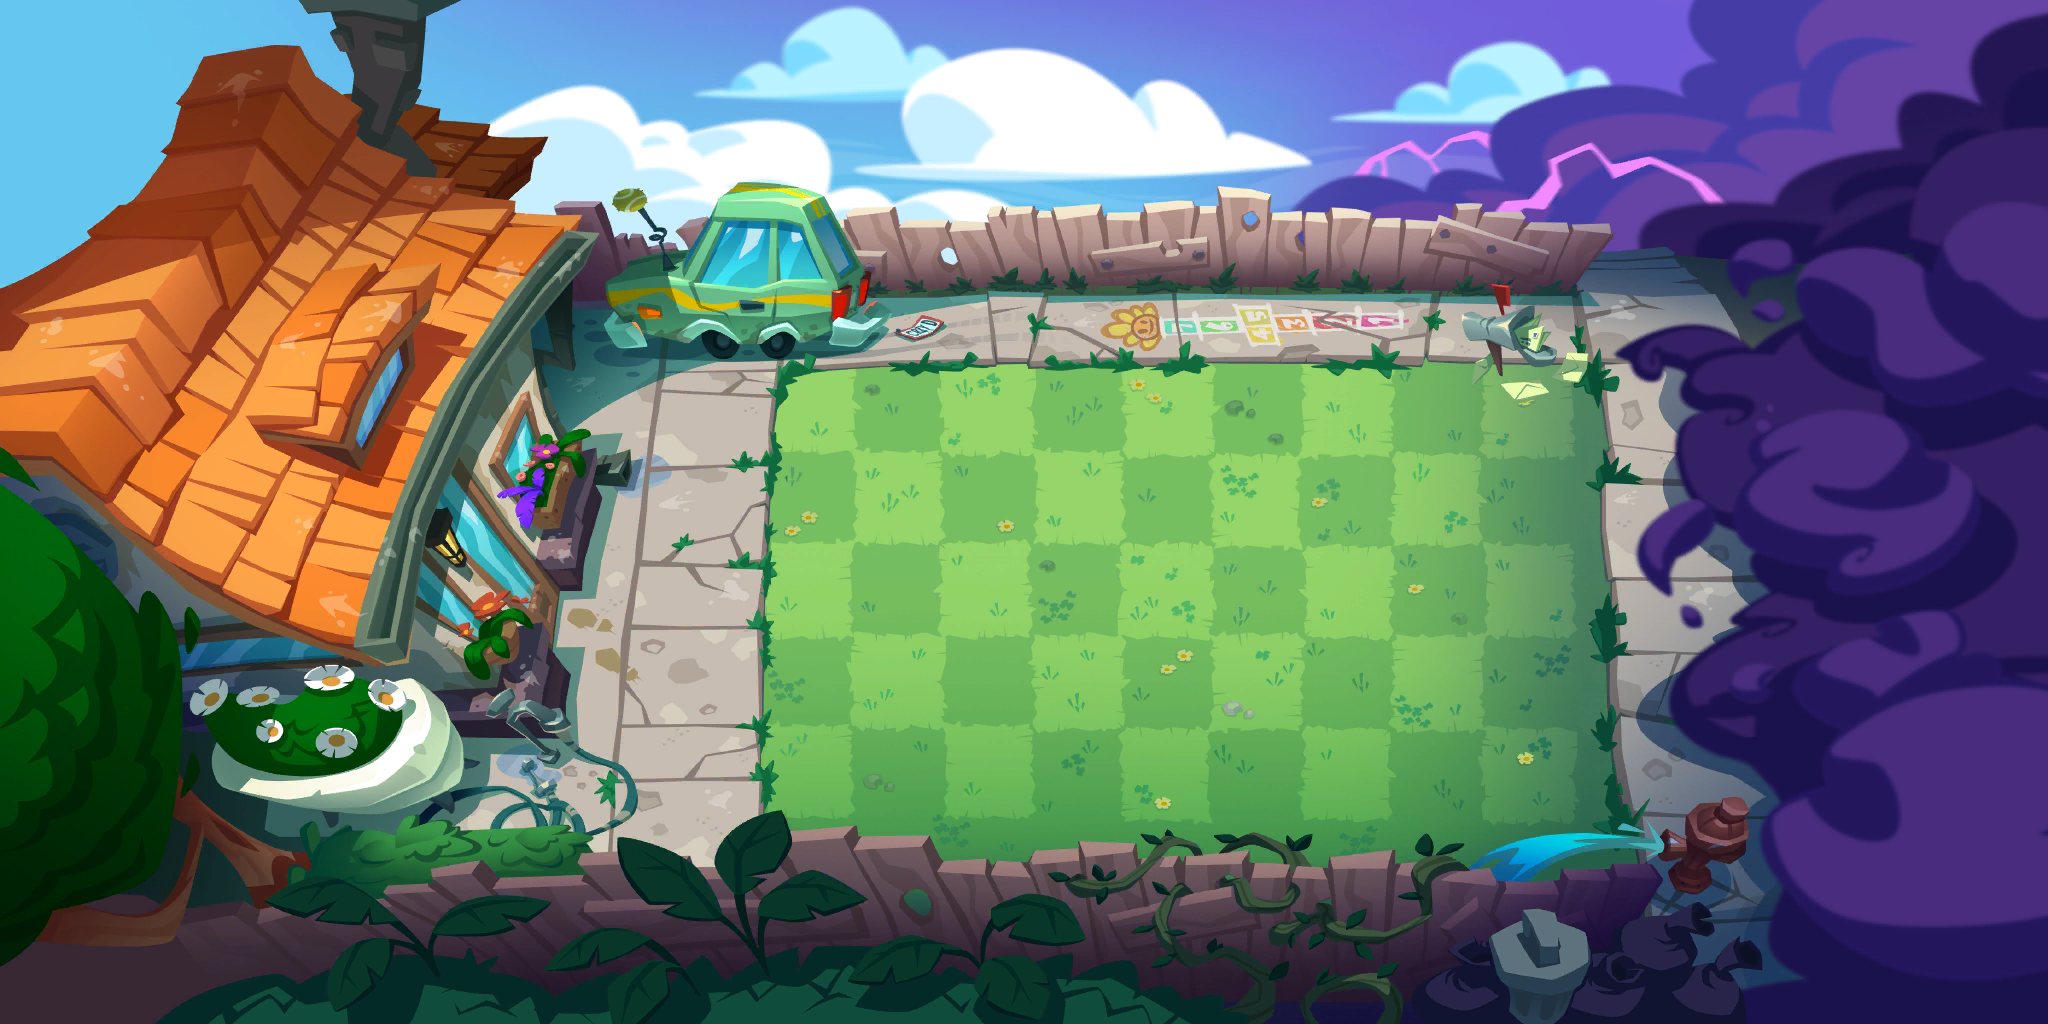 Plants Vs Zombies 3 is now Available, First Soft Launch is in the  Philippines –